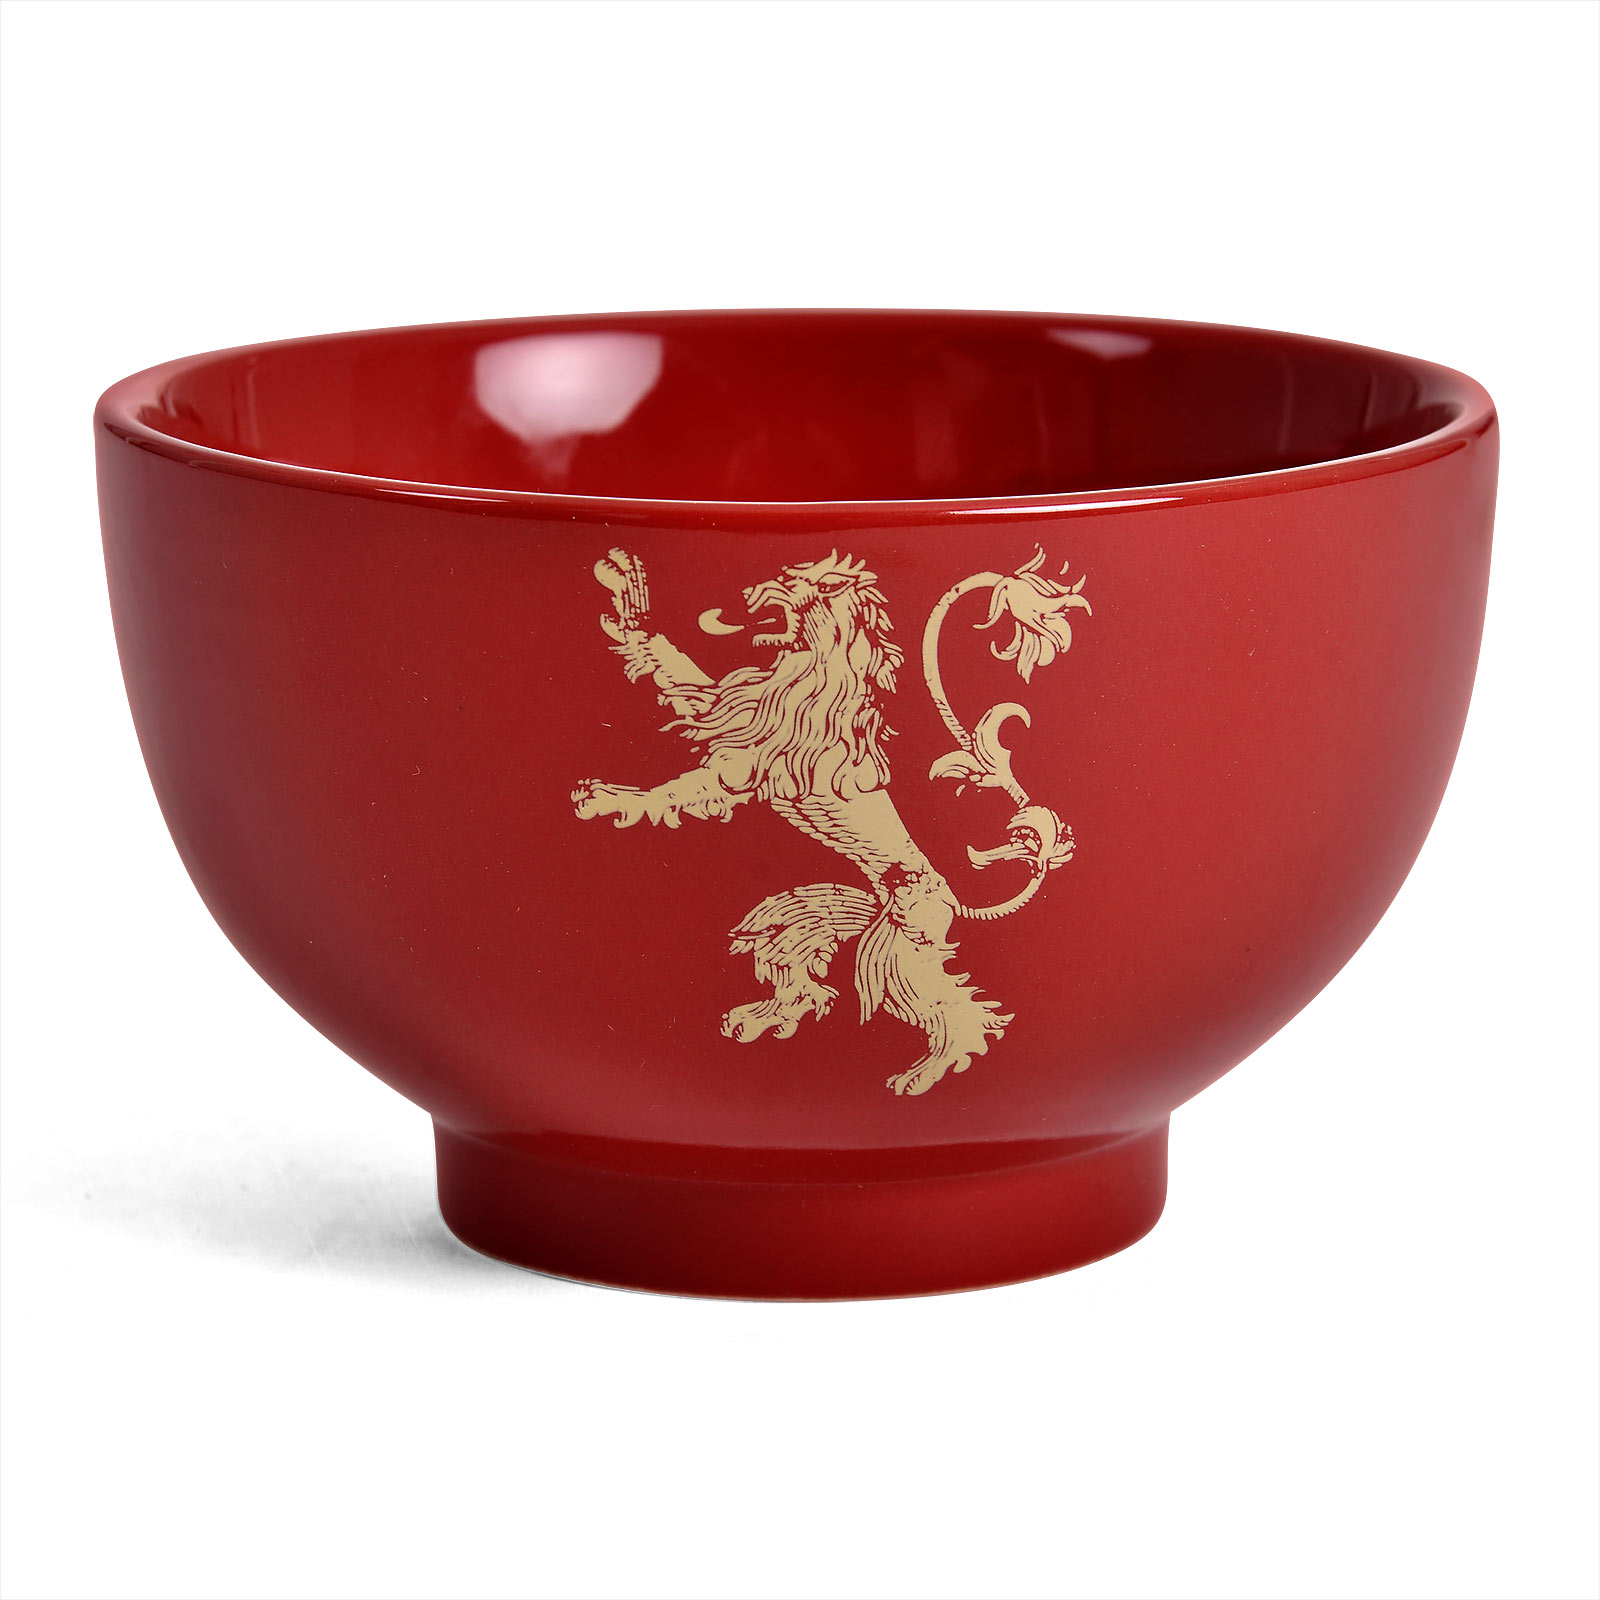 Game of Thrones - Lannister Crest Cereal Bowl